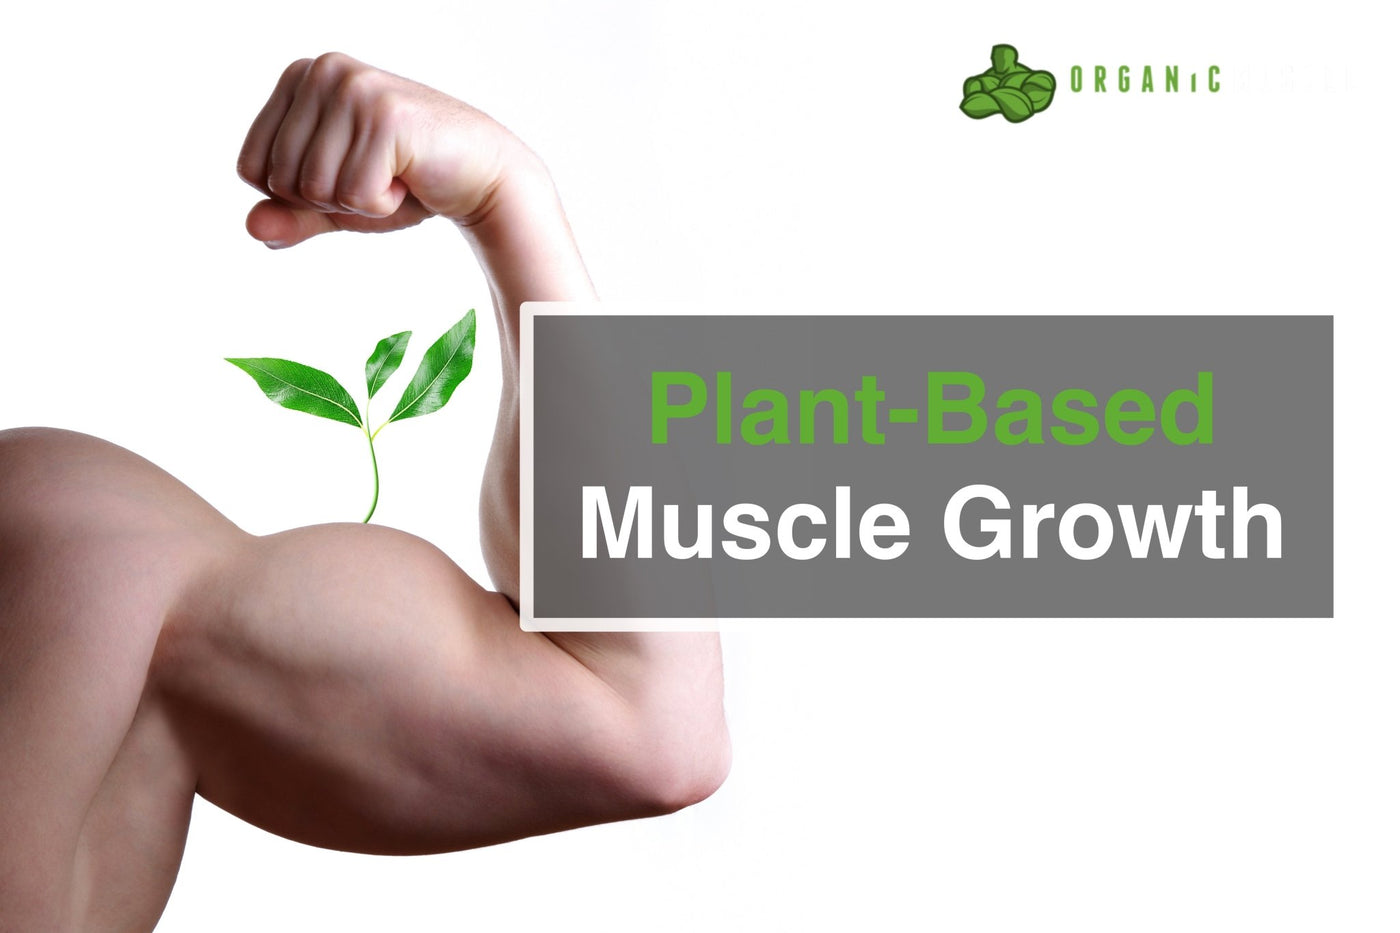 Plant-Based Muscle Growth - Organic Muscle Fitness Supplements